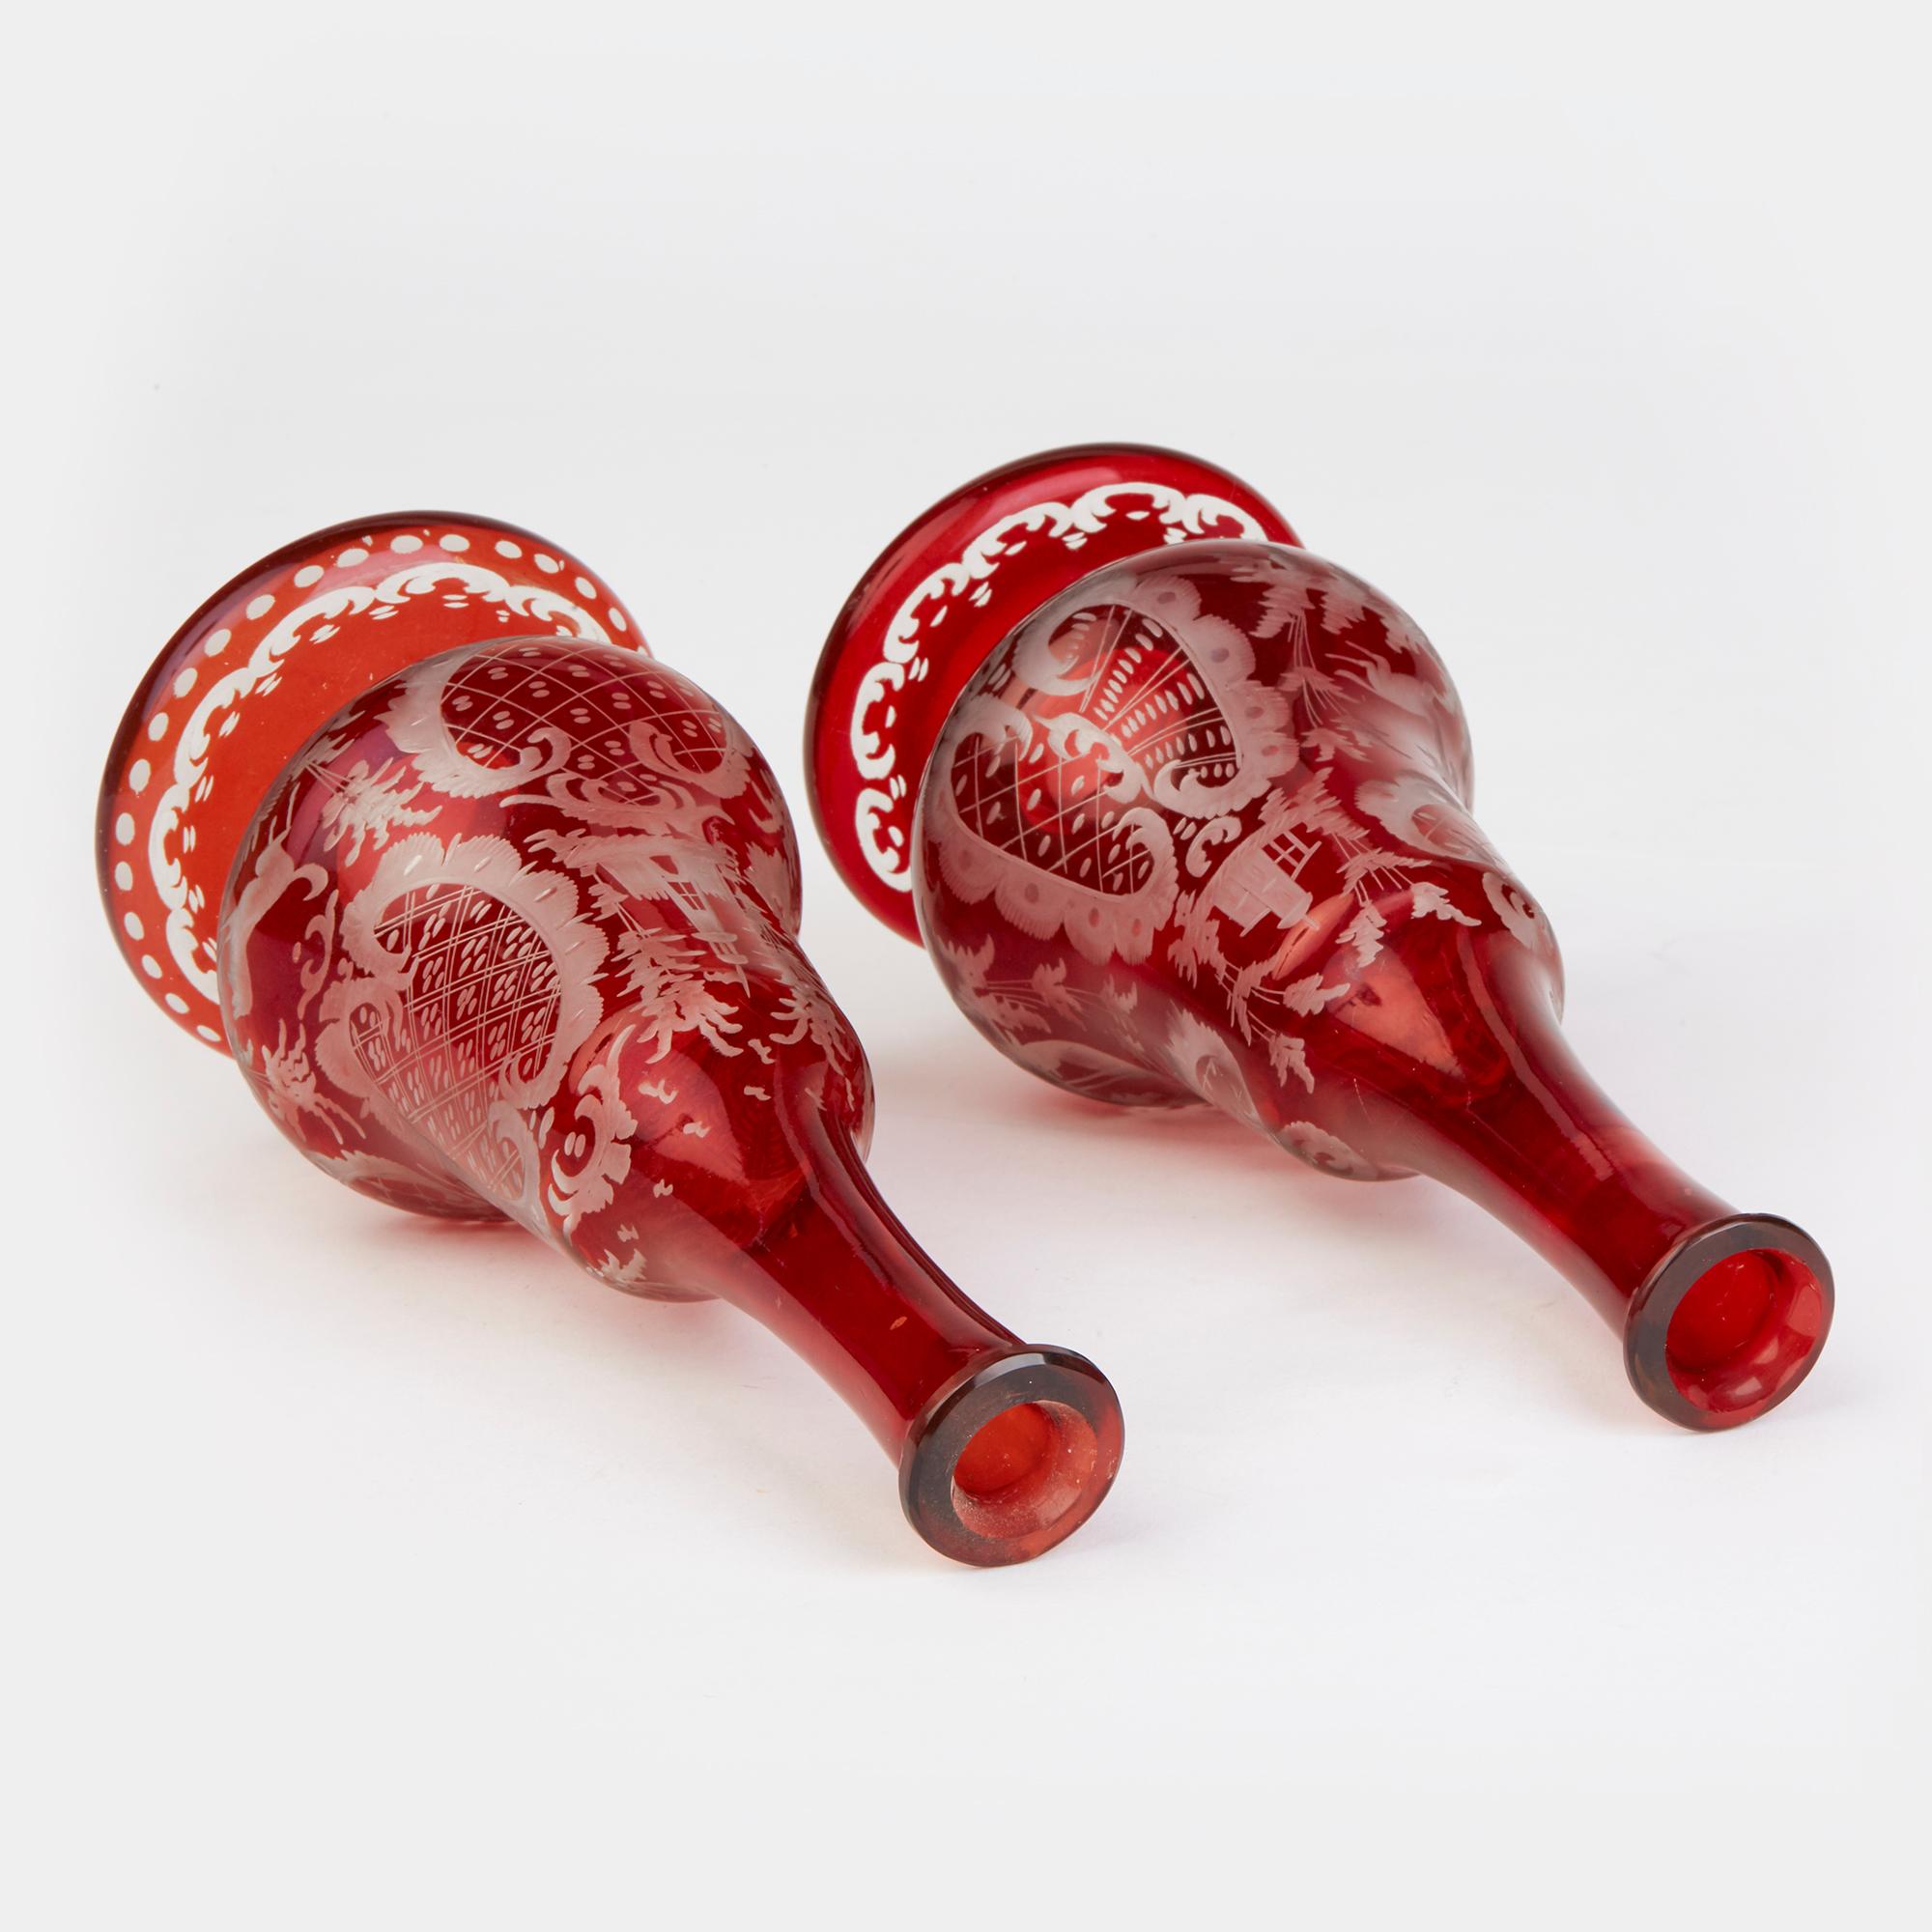 Czech Bohemian Antique Pair of Ruby Flashed Glass Decanters and Stoppers, 19th Century